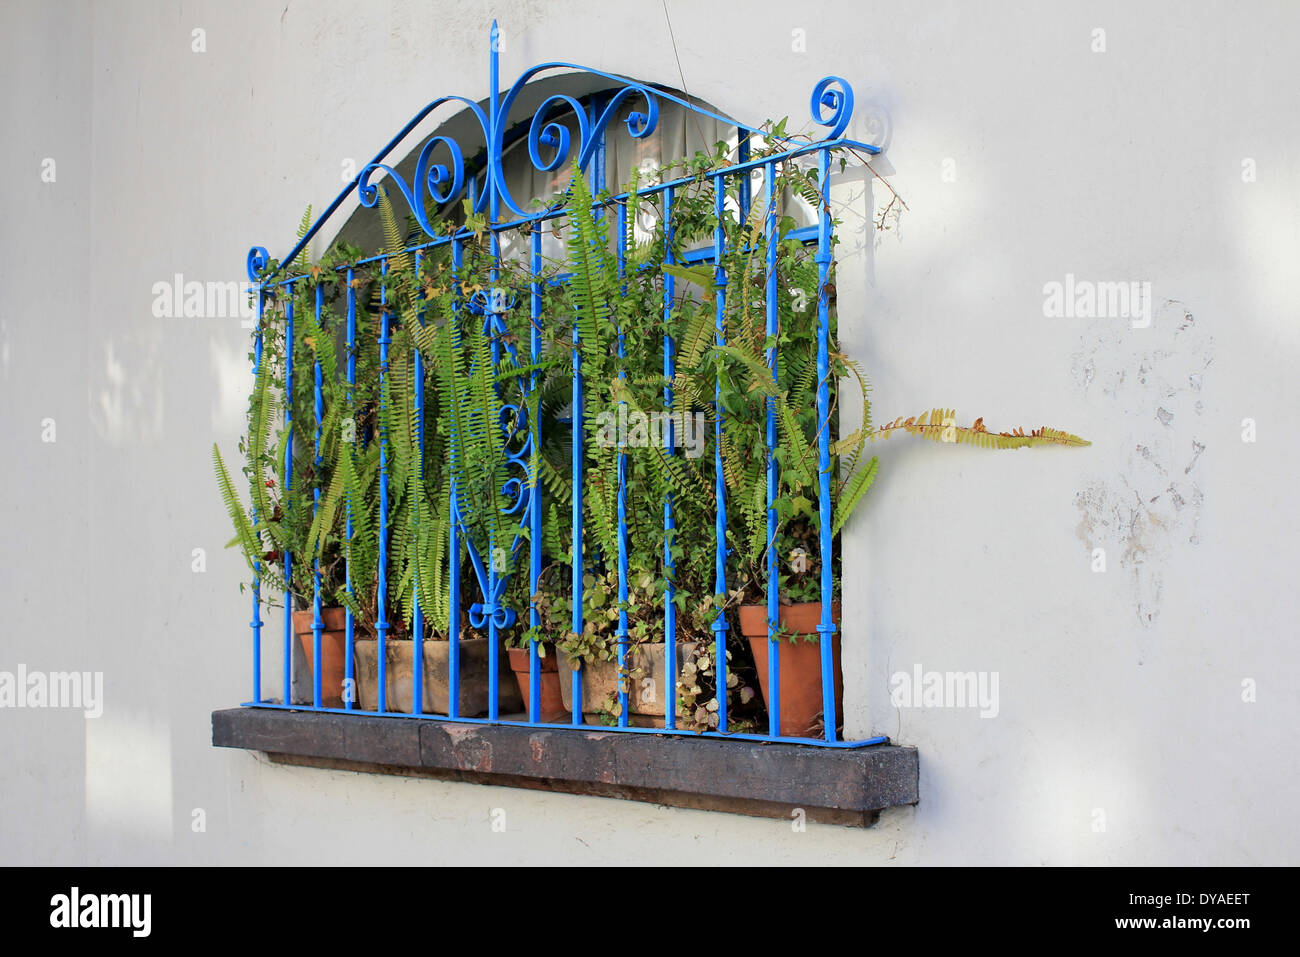 Ferns in window with blue railings, Condesa, Mexico City, Mexico Stock Photo